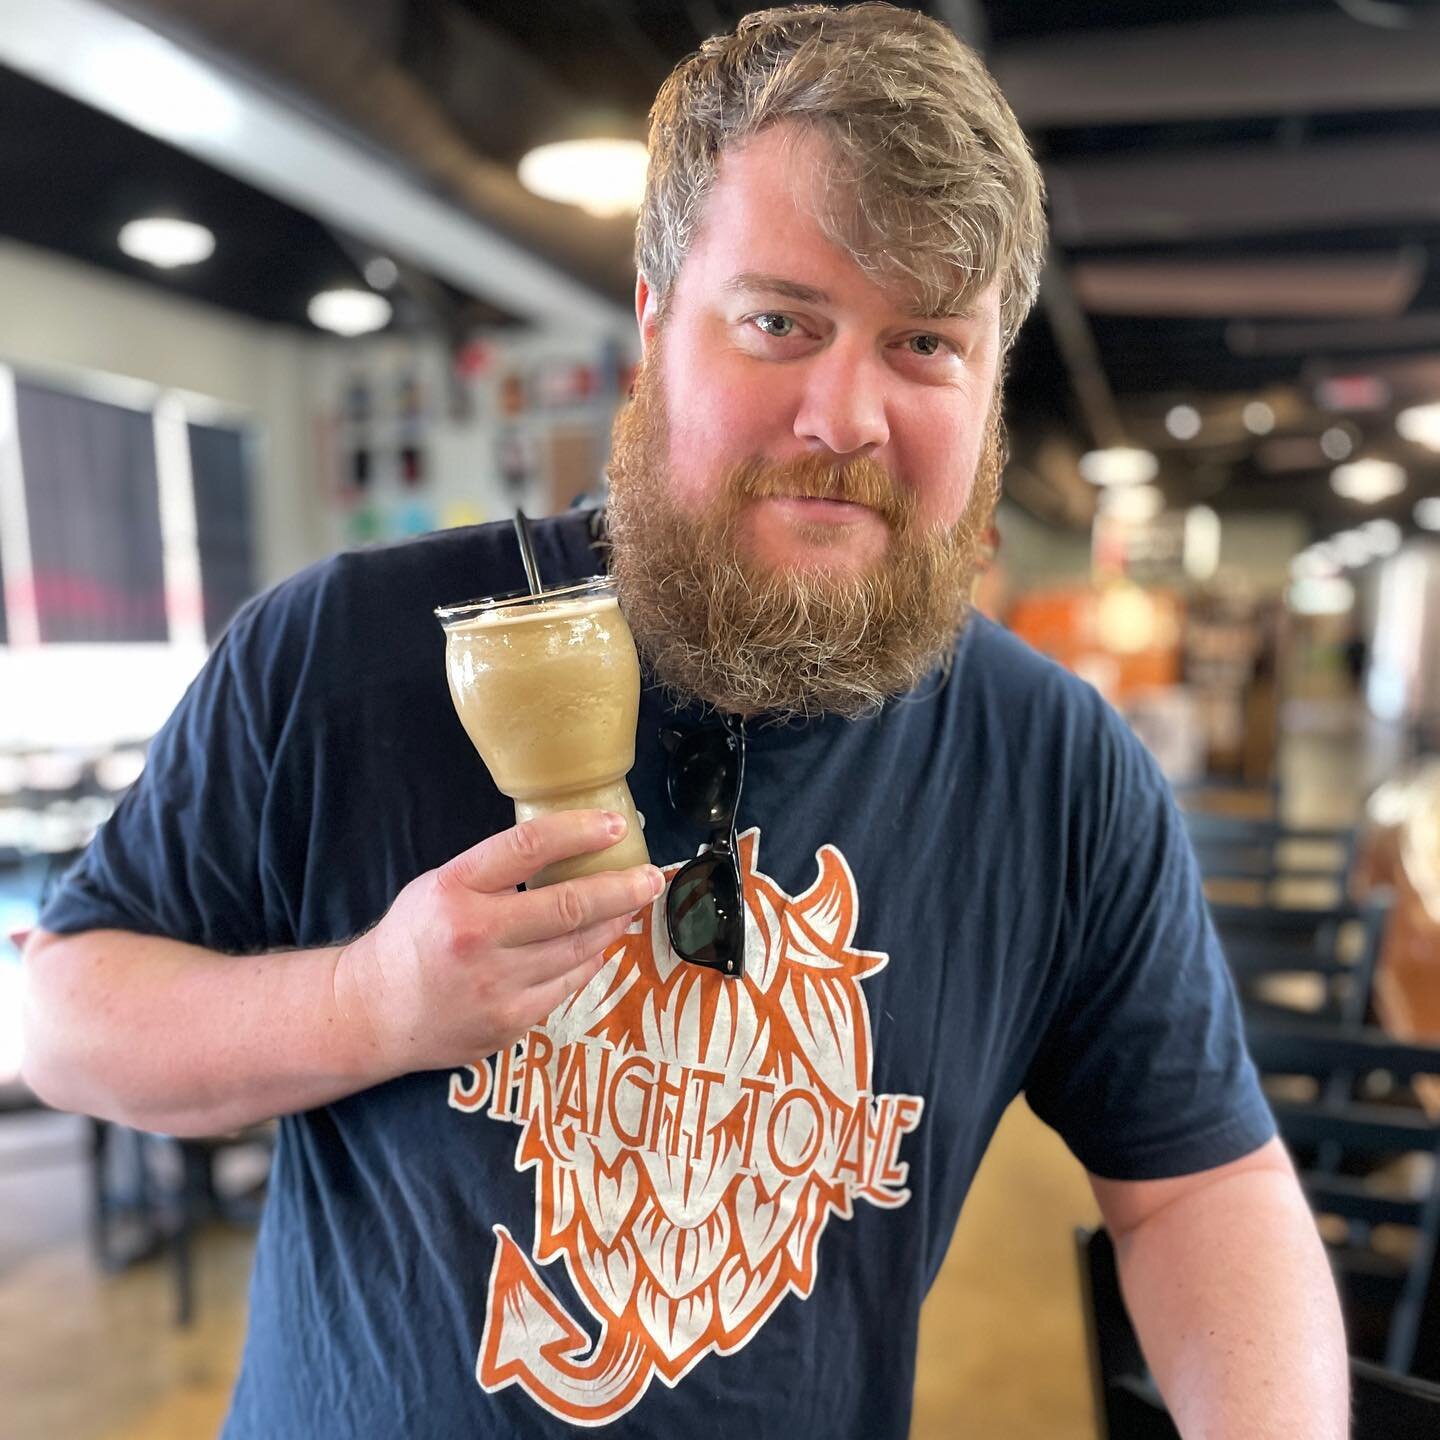 🥳@straighttoale is turning lucky number 13 tomorrow!!

🥳They&rsquo;re celebration kicks off at 5:00 PM on Saturday, but you can head over anytime to wish them a happy anniversary and try their delicious drink specials, like this Park View Porter mi